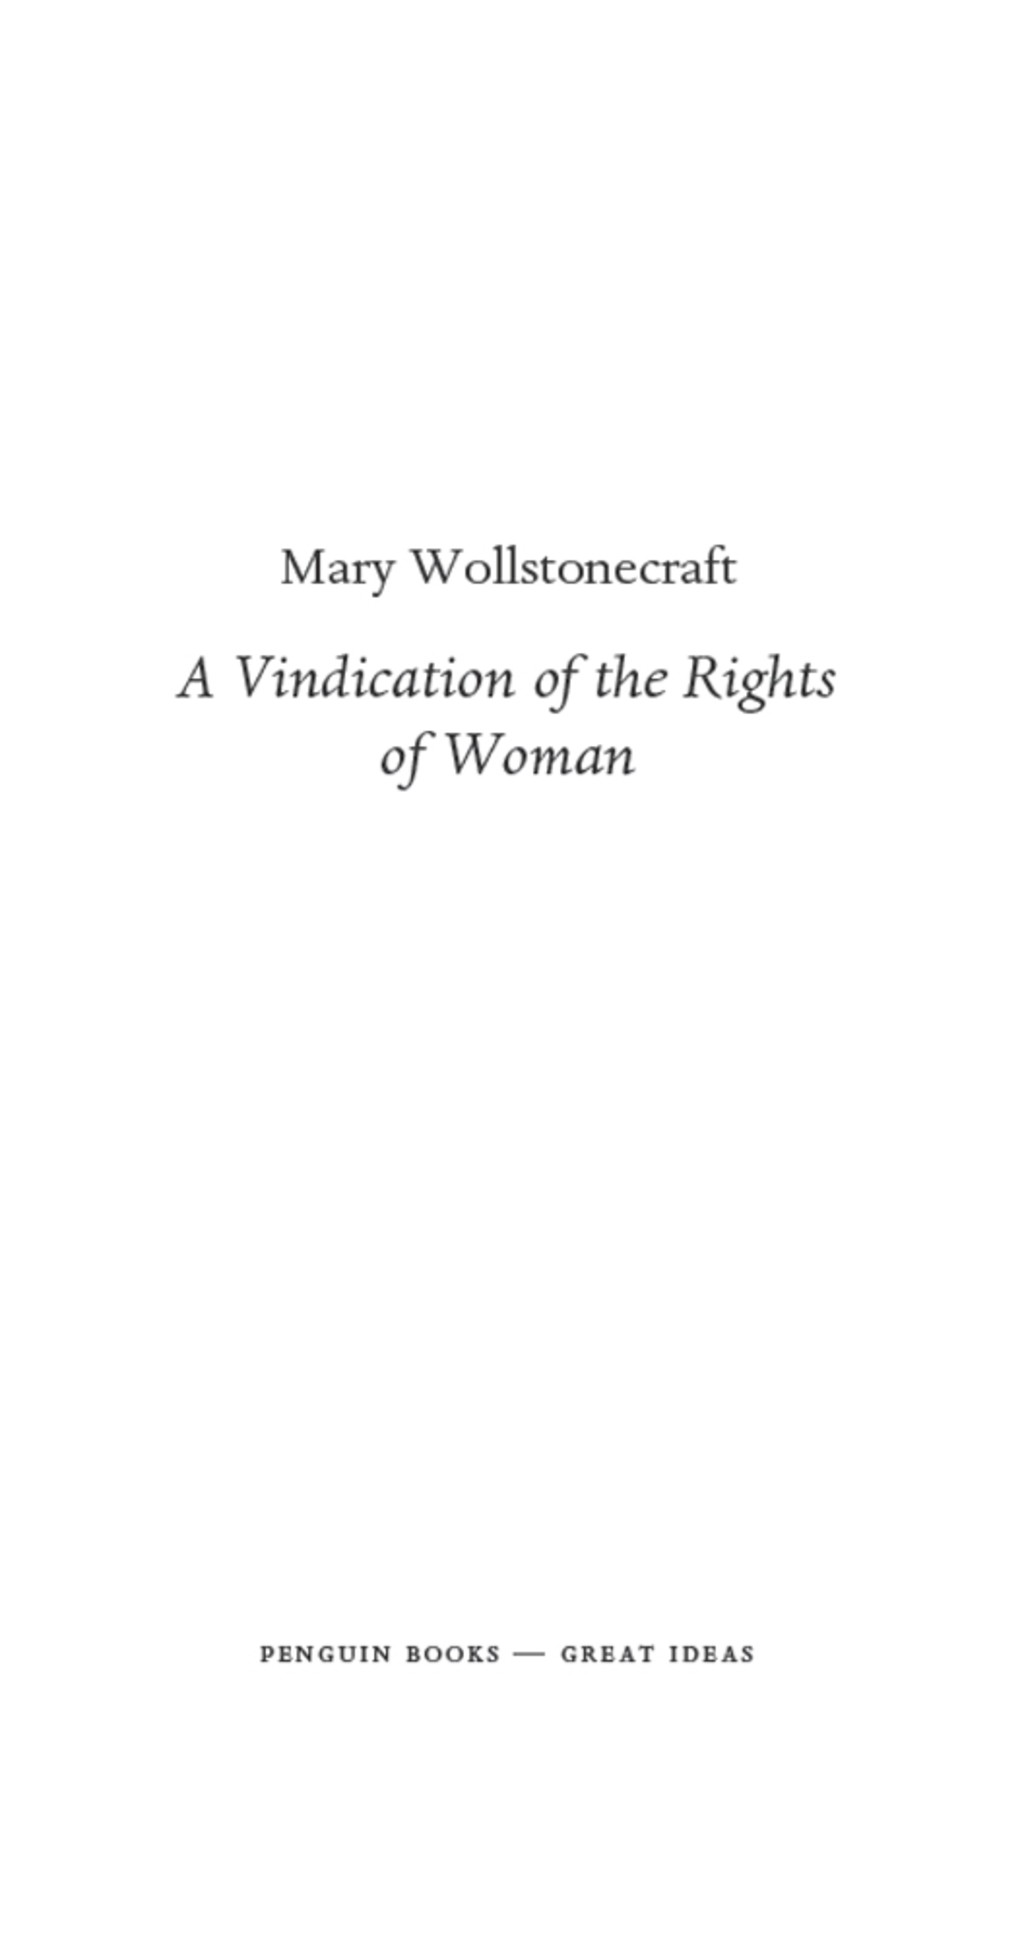 A Vindication of the Rights of Woman (eBook) - Mary Wollstonecraft,